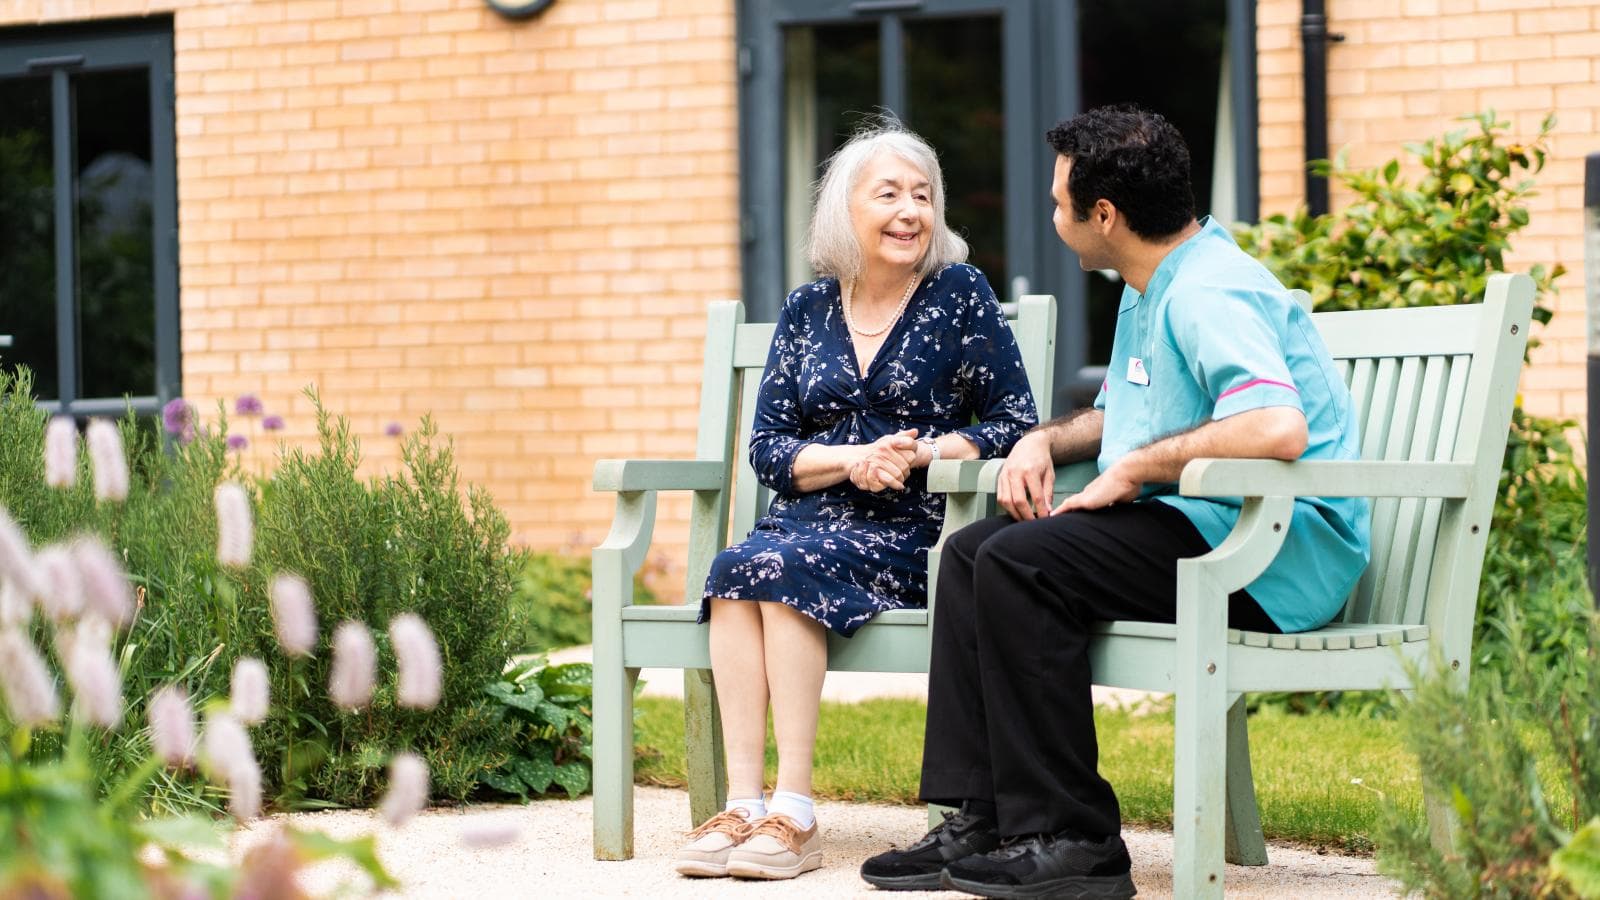 Female care home resident sat on a garden bench speaking to a male care assistant